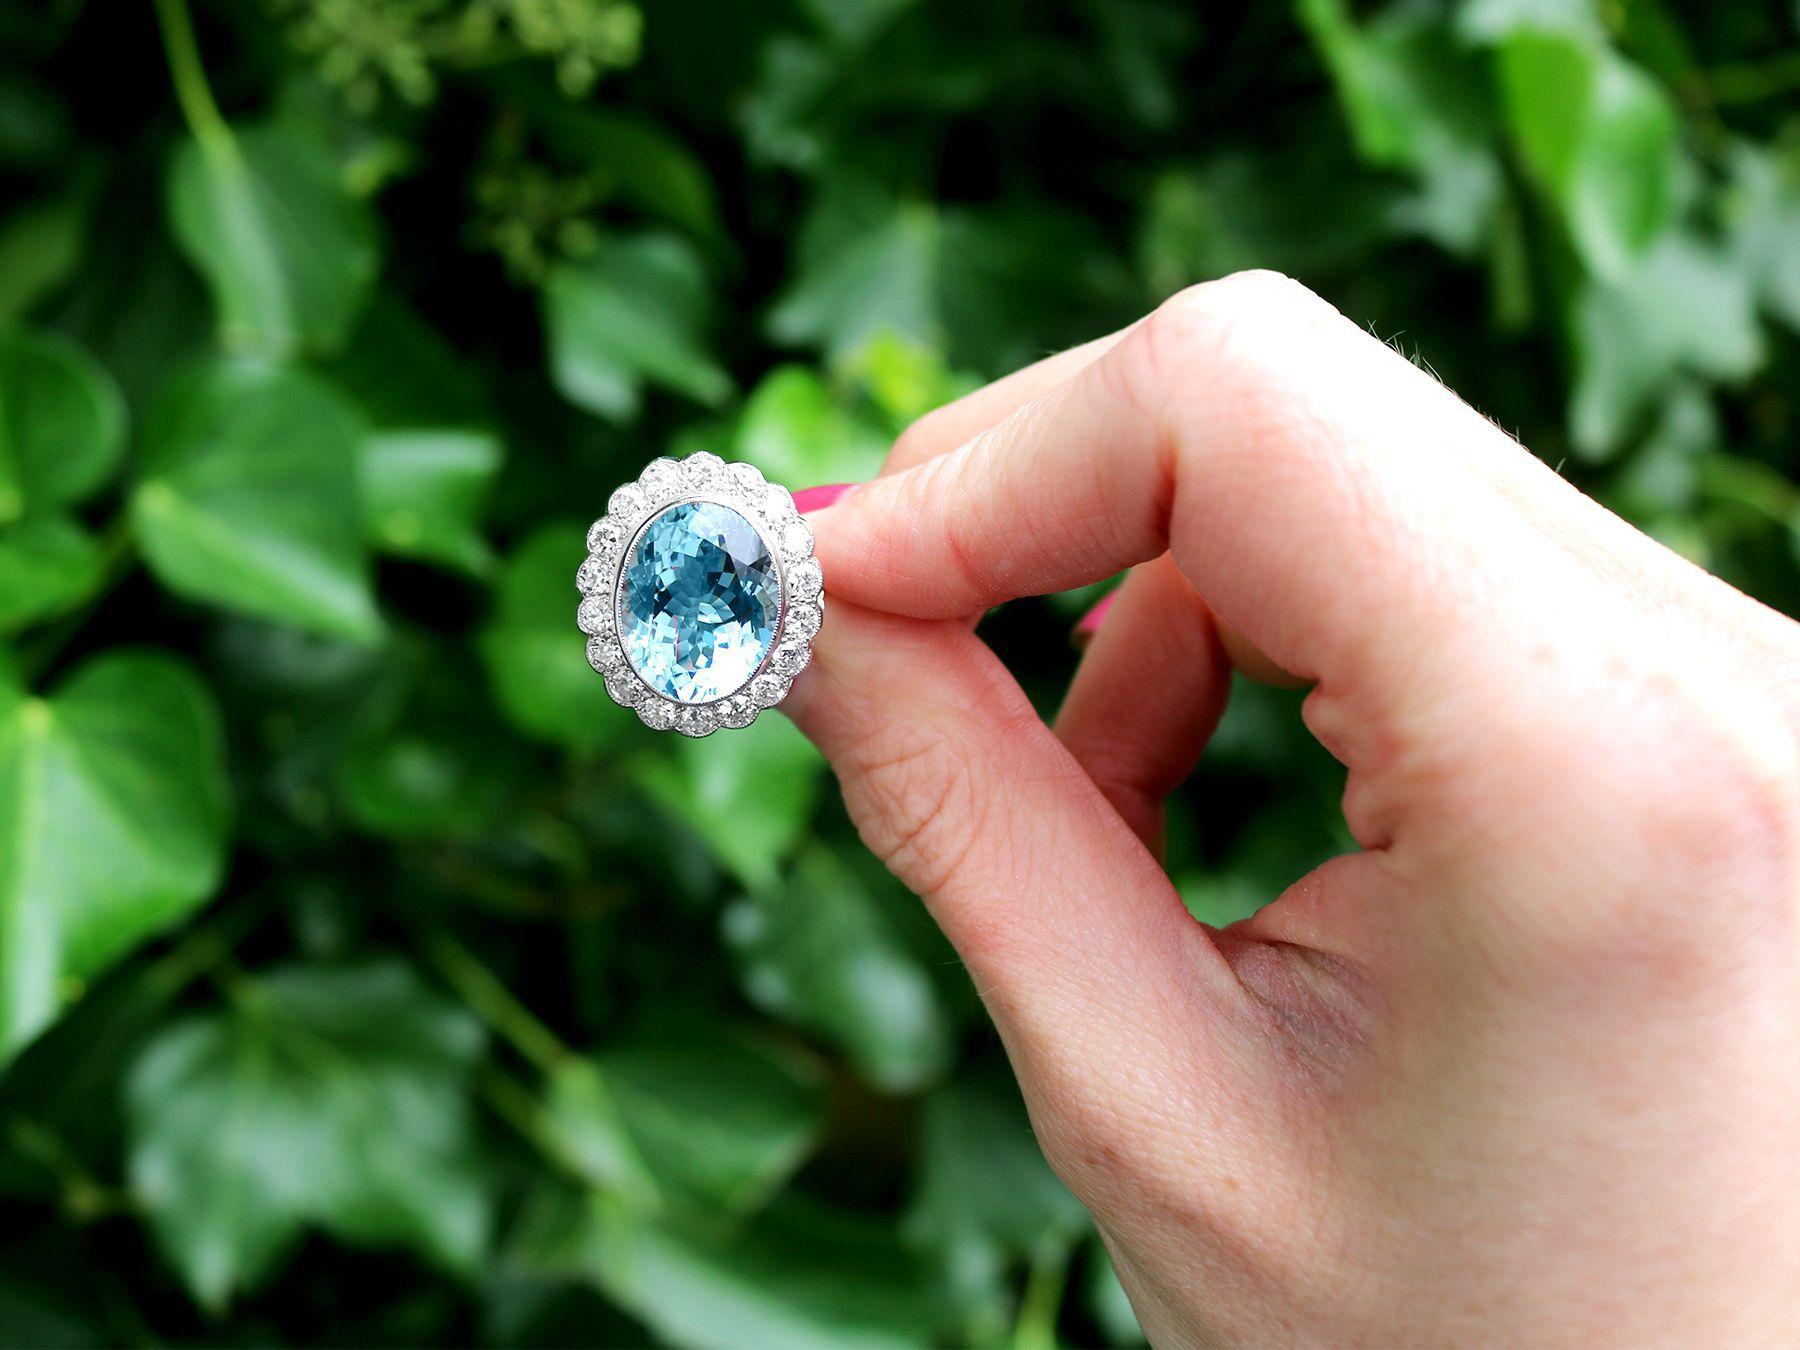 A stunning, fine and impressive 9.89 carat aquamarine and 2.70 carat diamond and platinum cluster ring; part of our diverse contemporary jewelry and estate jewelry collections.

This stunning contemporary aquamarine ring has been crafted in